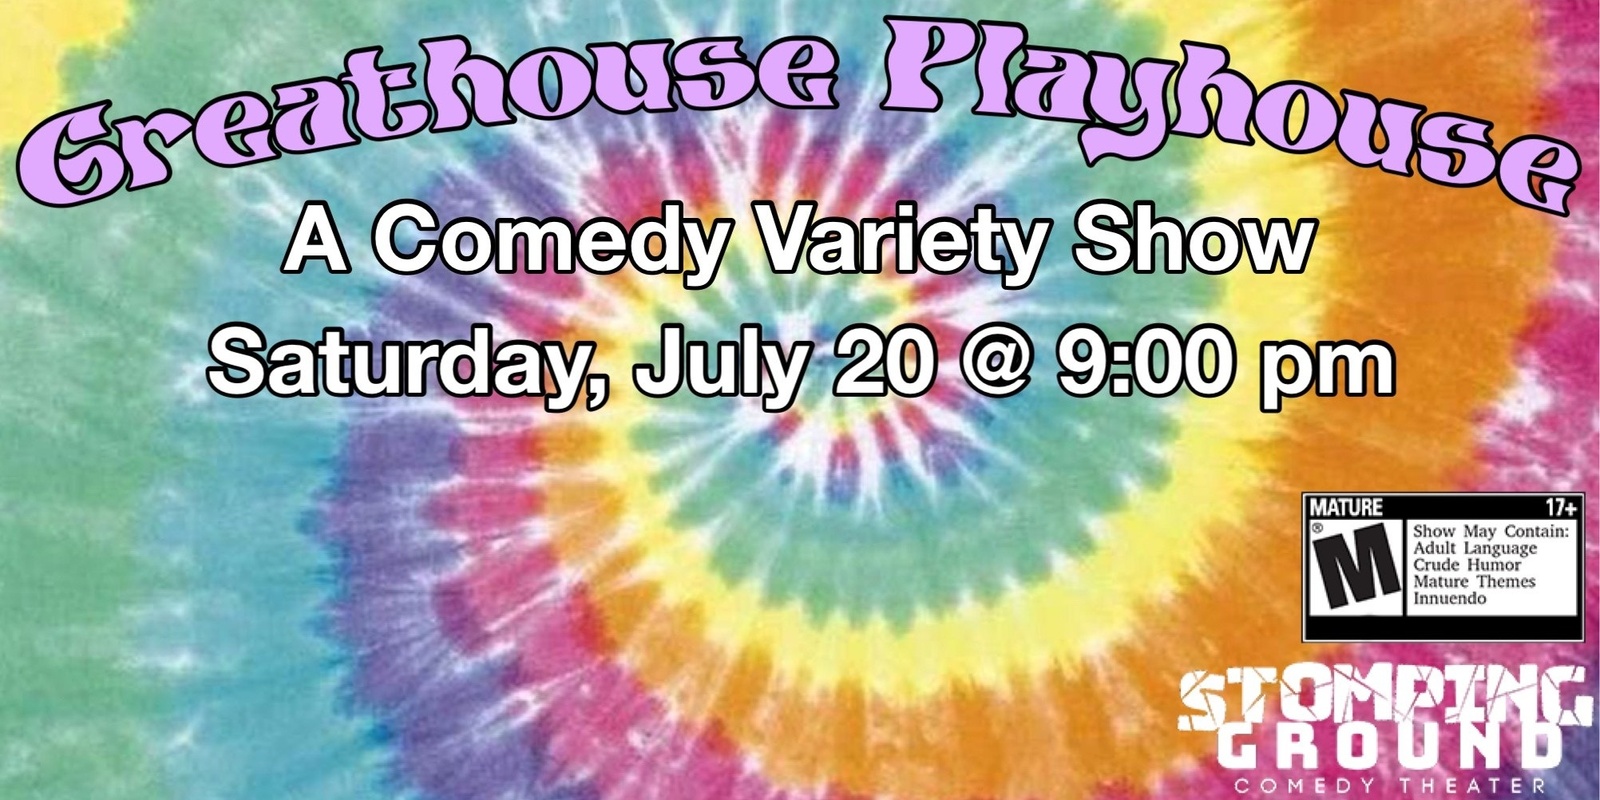 Banner image for Greathouse Playhouse